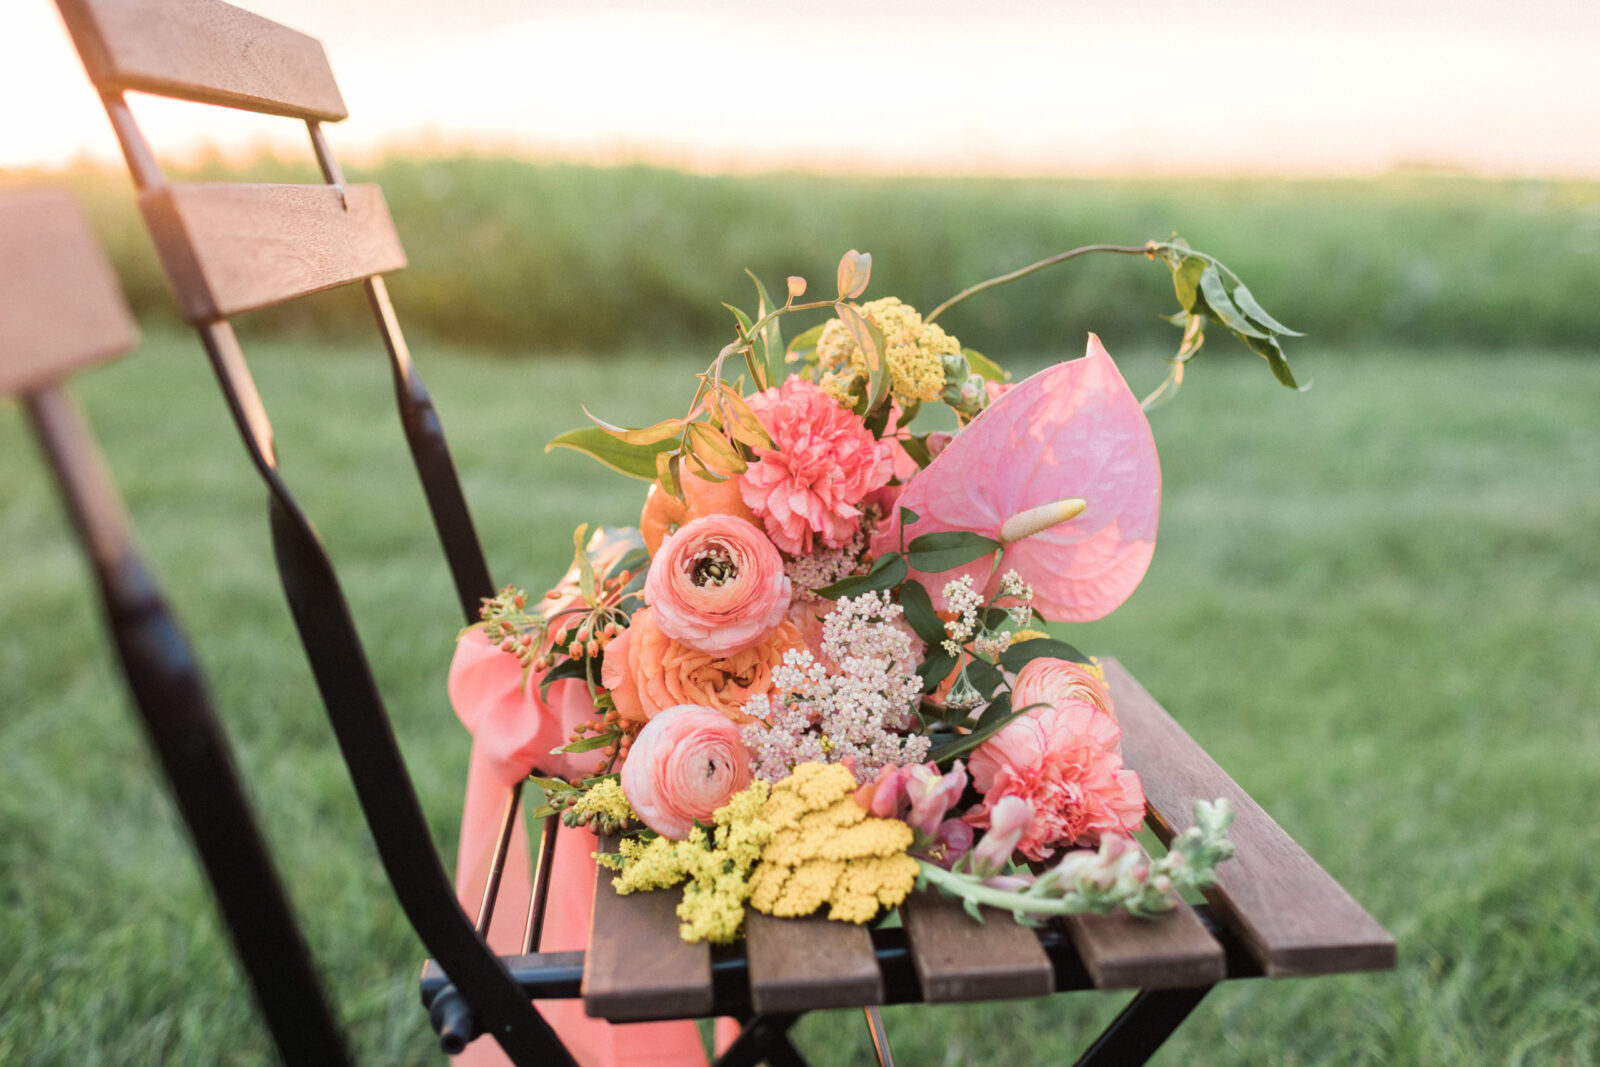 20 Spring and Summer Bouquets Featuring the Prettiest Pops of Peach and Coral Featured by Brontë Bride